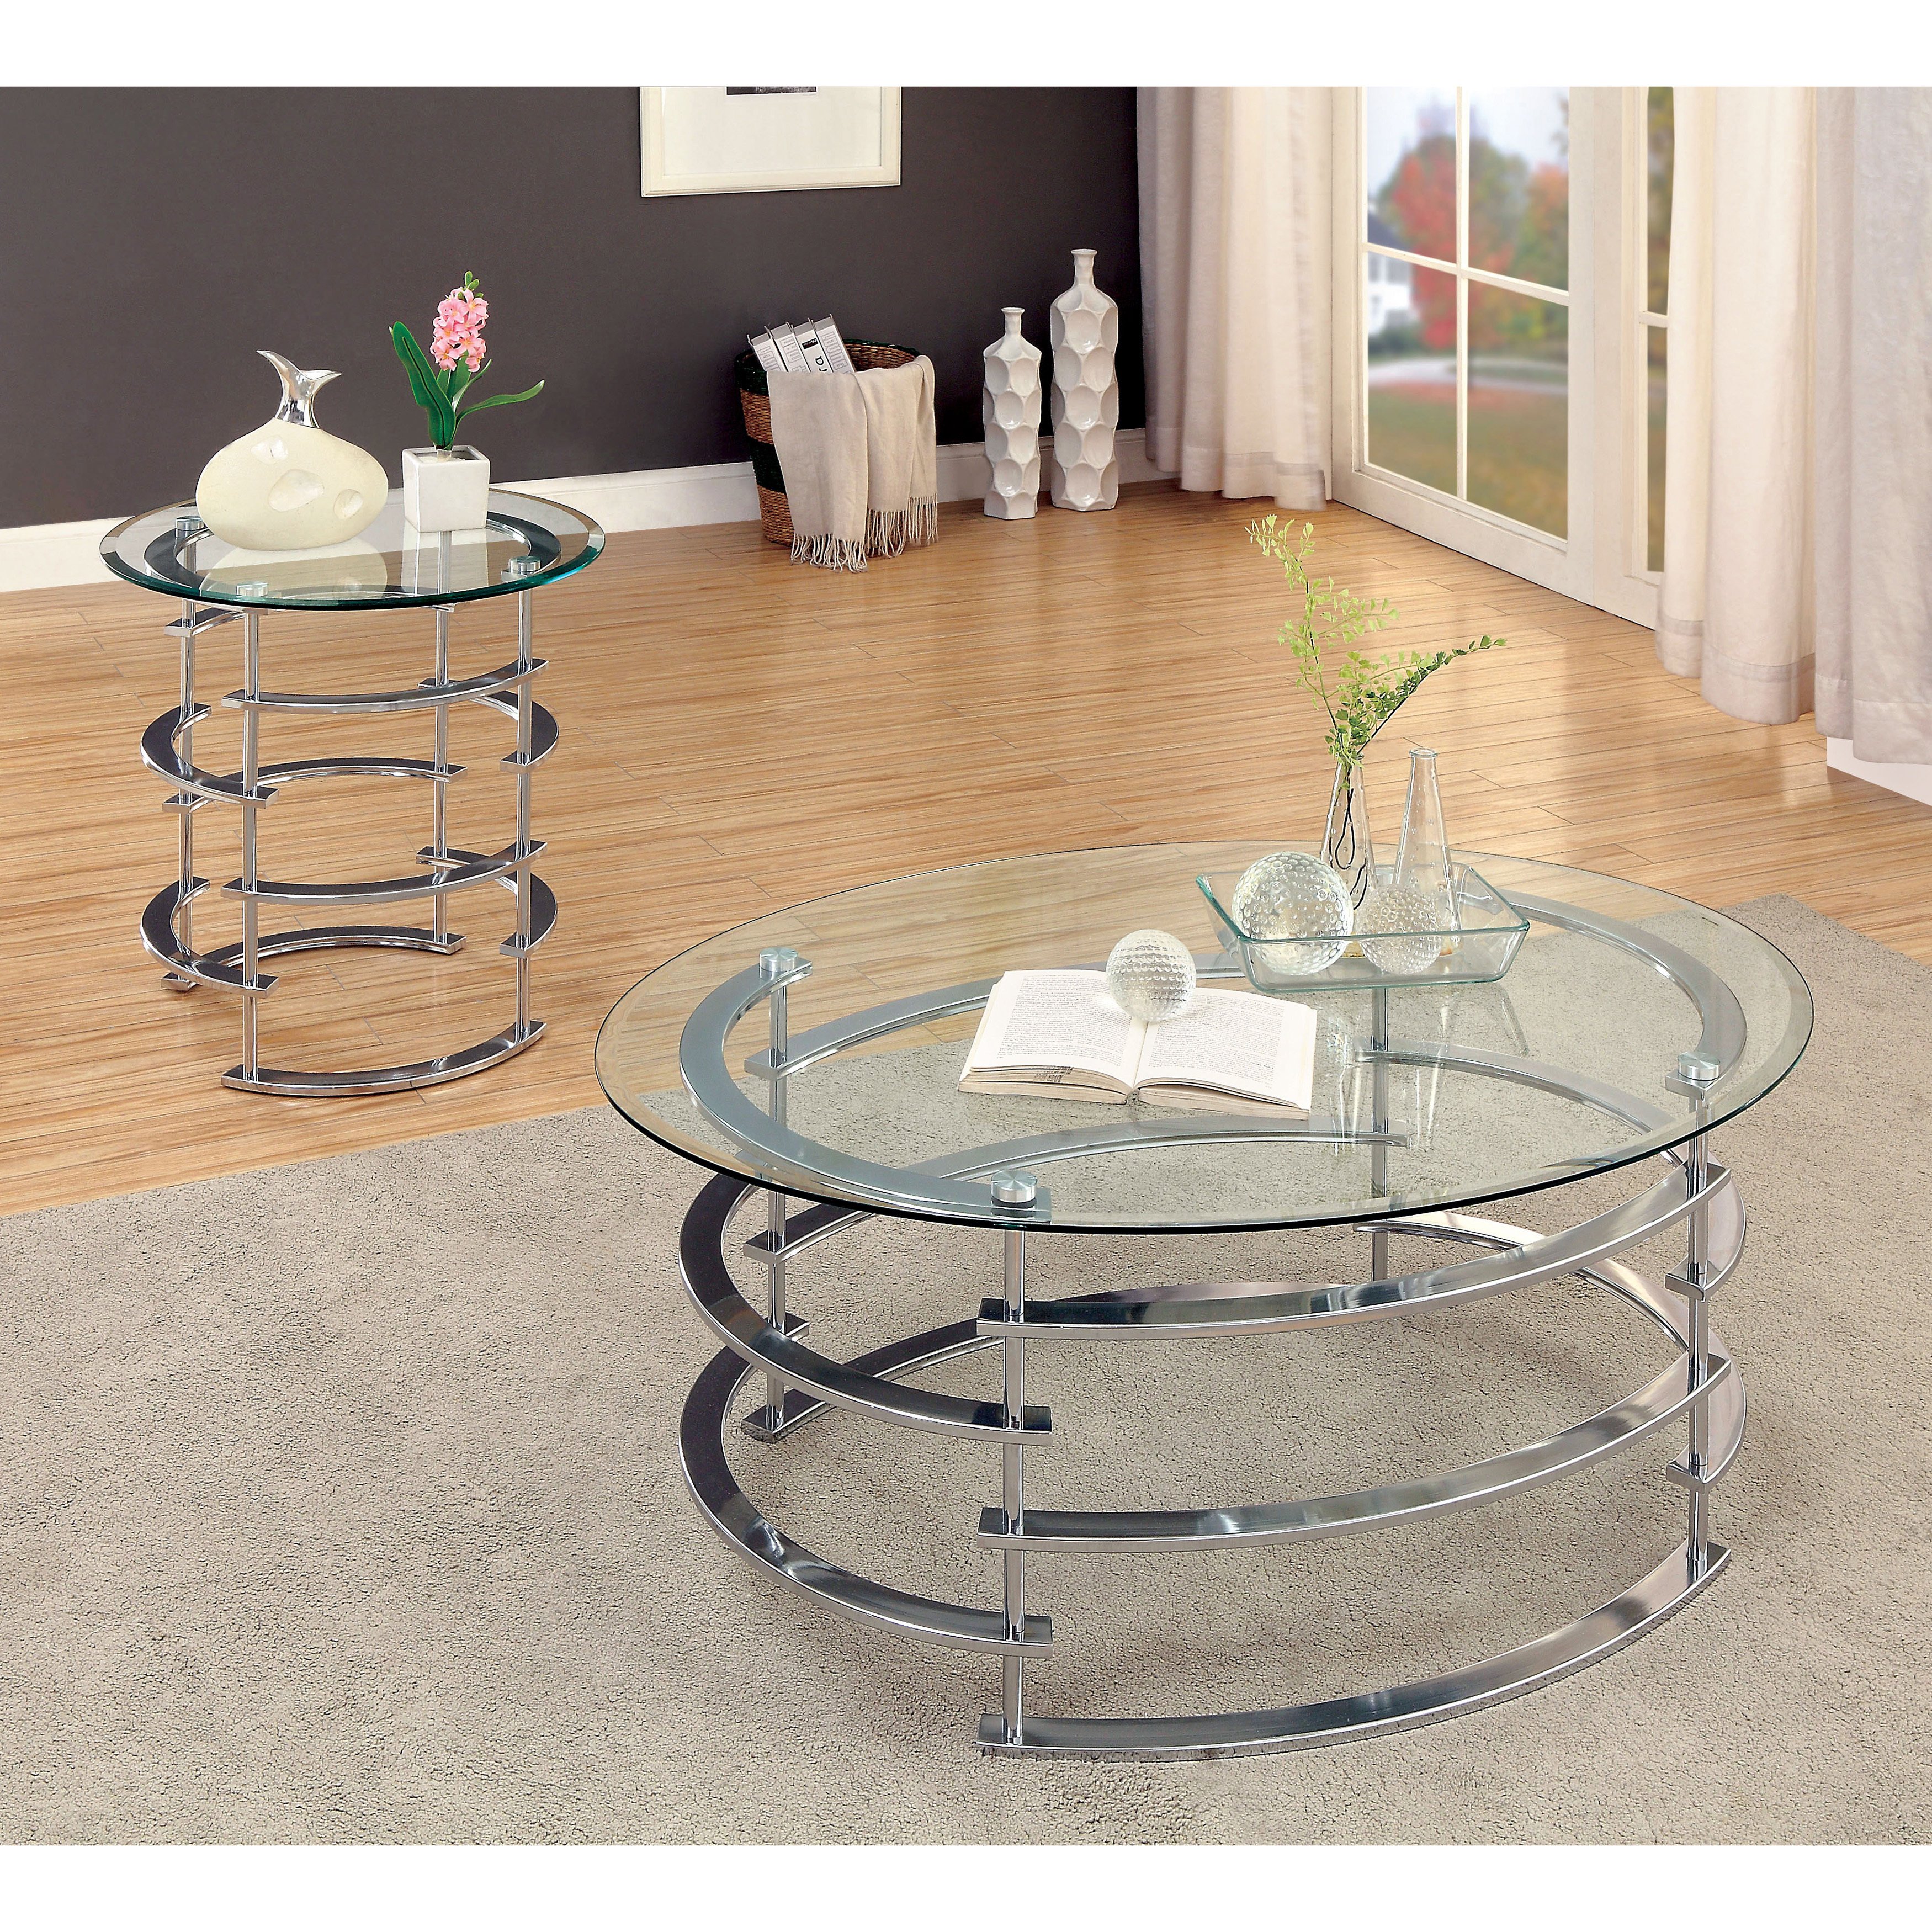 silver orchid marcello contemporary piece glass top accent table set coffee and sets lucite pedestal small deck round toronto gold decor apartment furniture with storage white